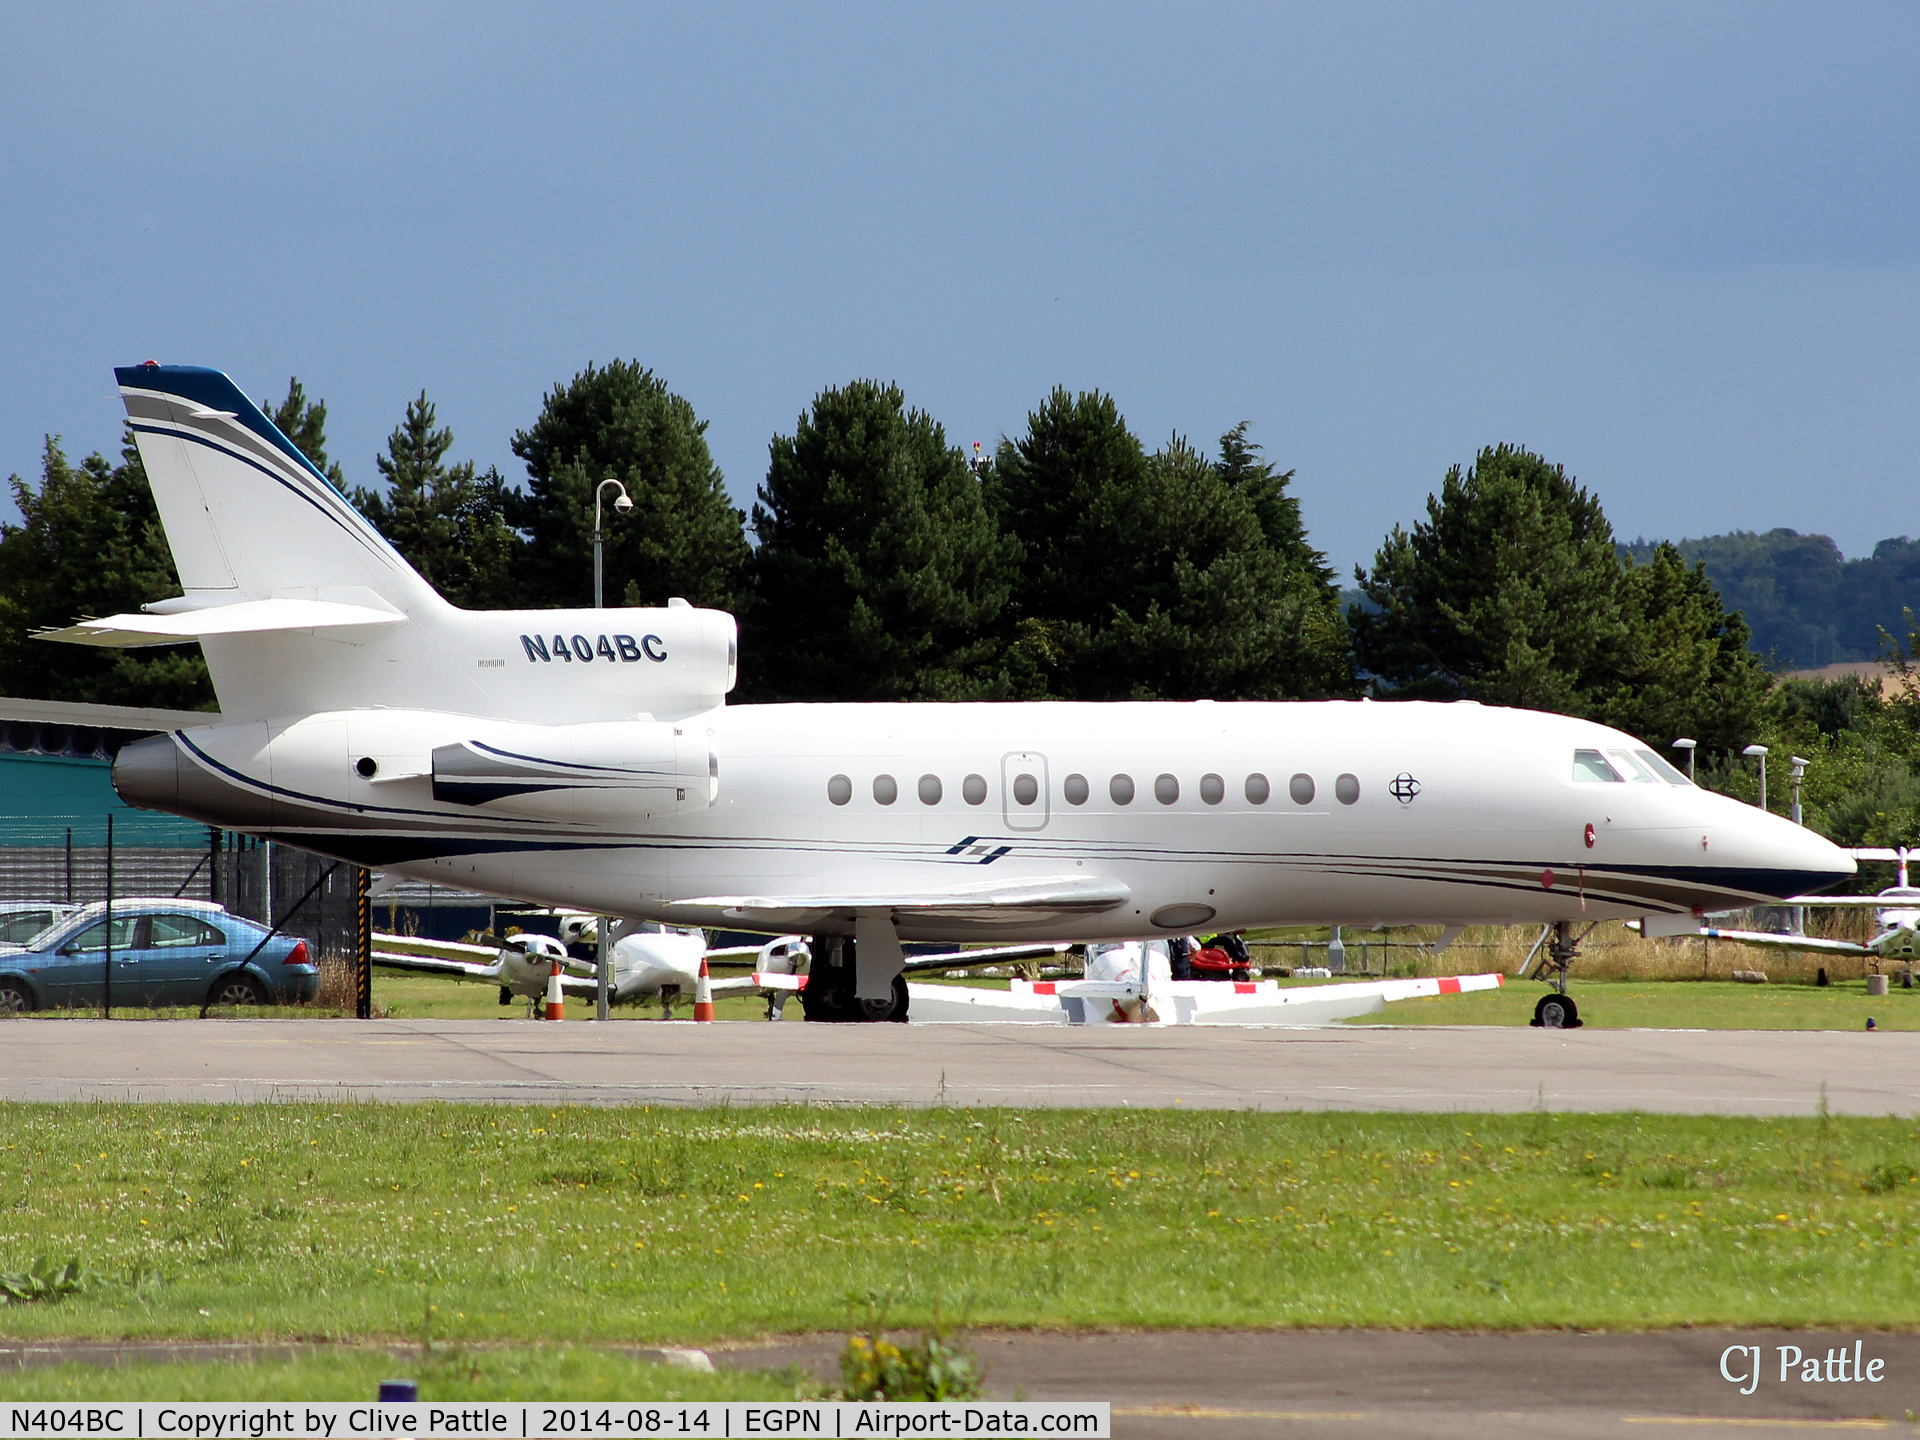 N404BC, 1993 Dassault Falcon 900B C/N 128, Dassault Brequet Mystere Falcon 900 c/n 128 N404BC pictured at Dundee Riverside EGPN.